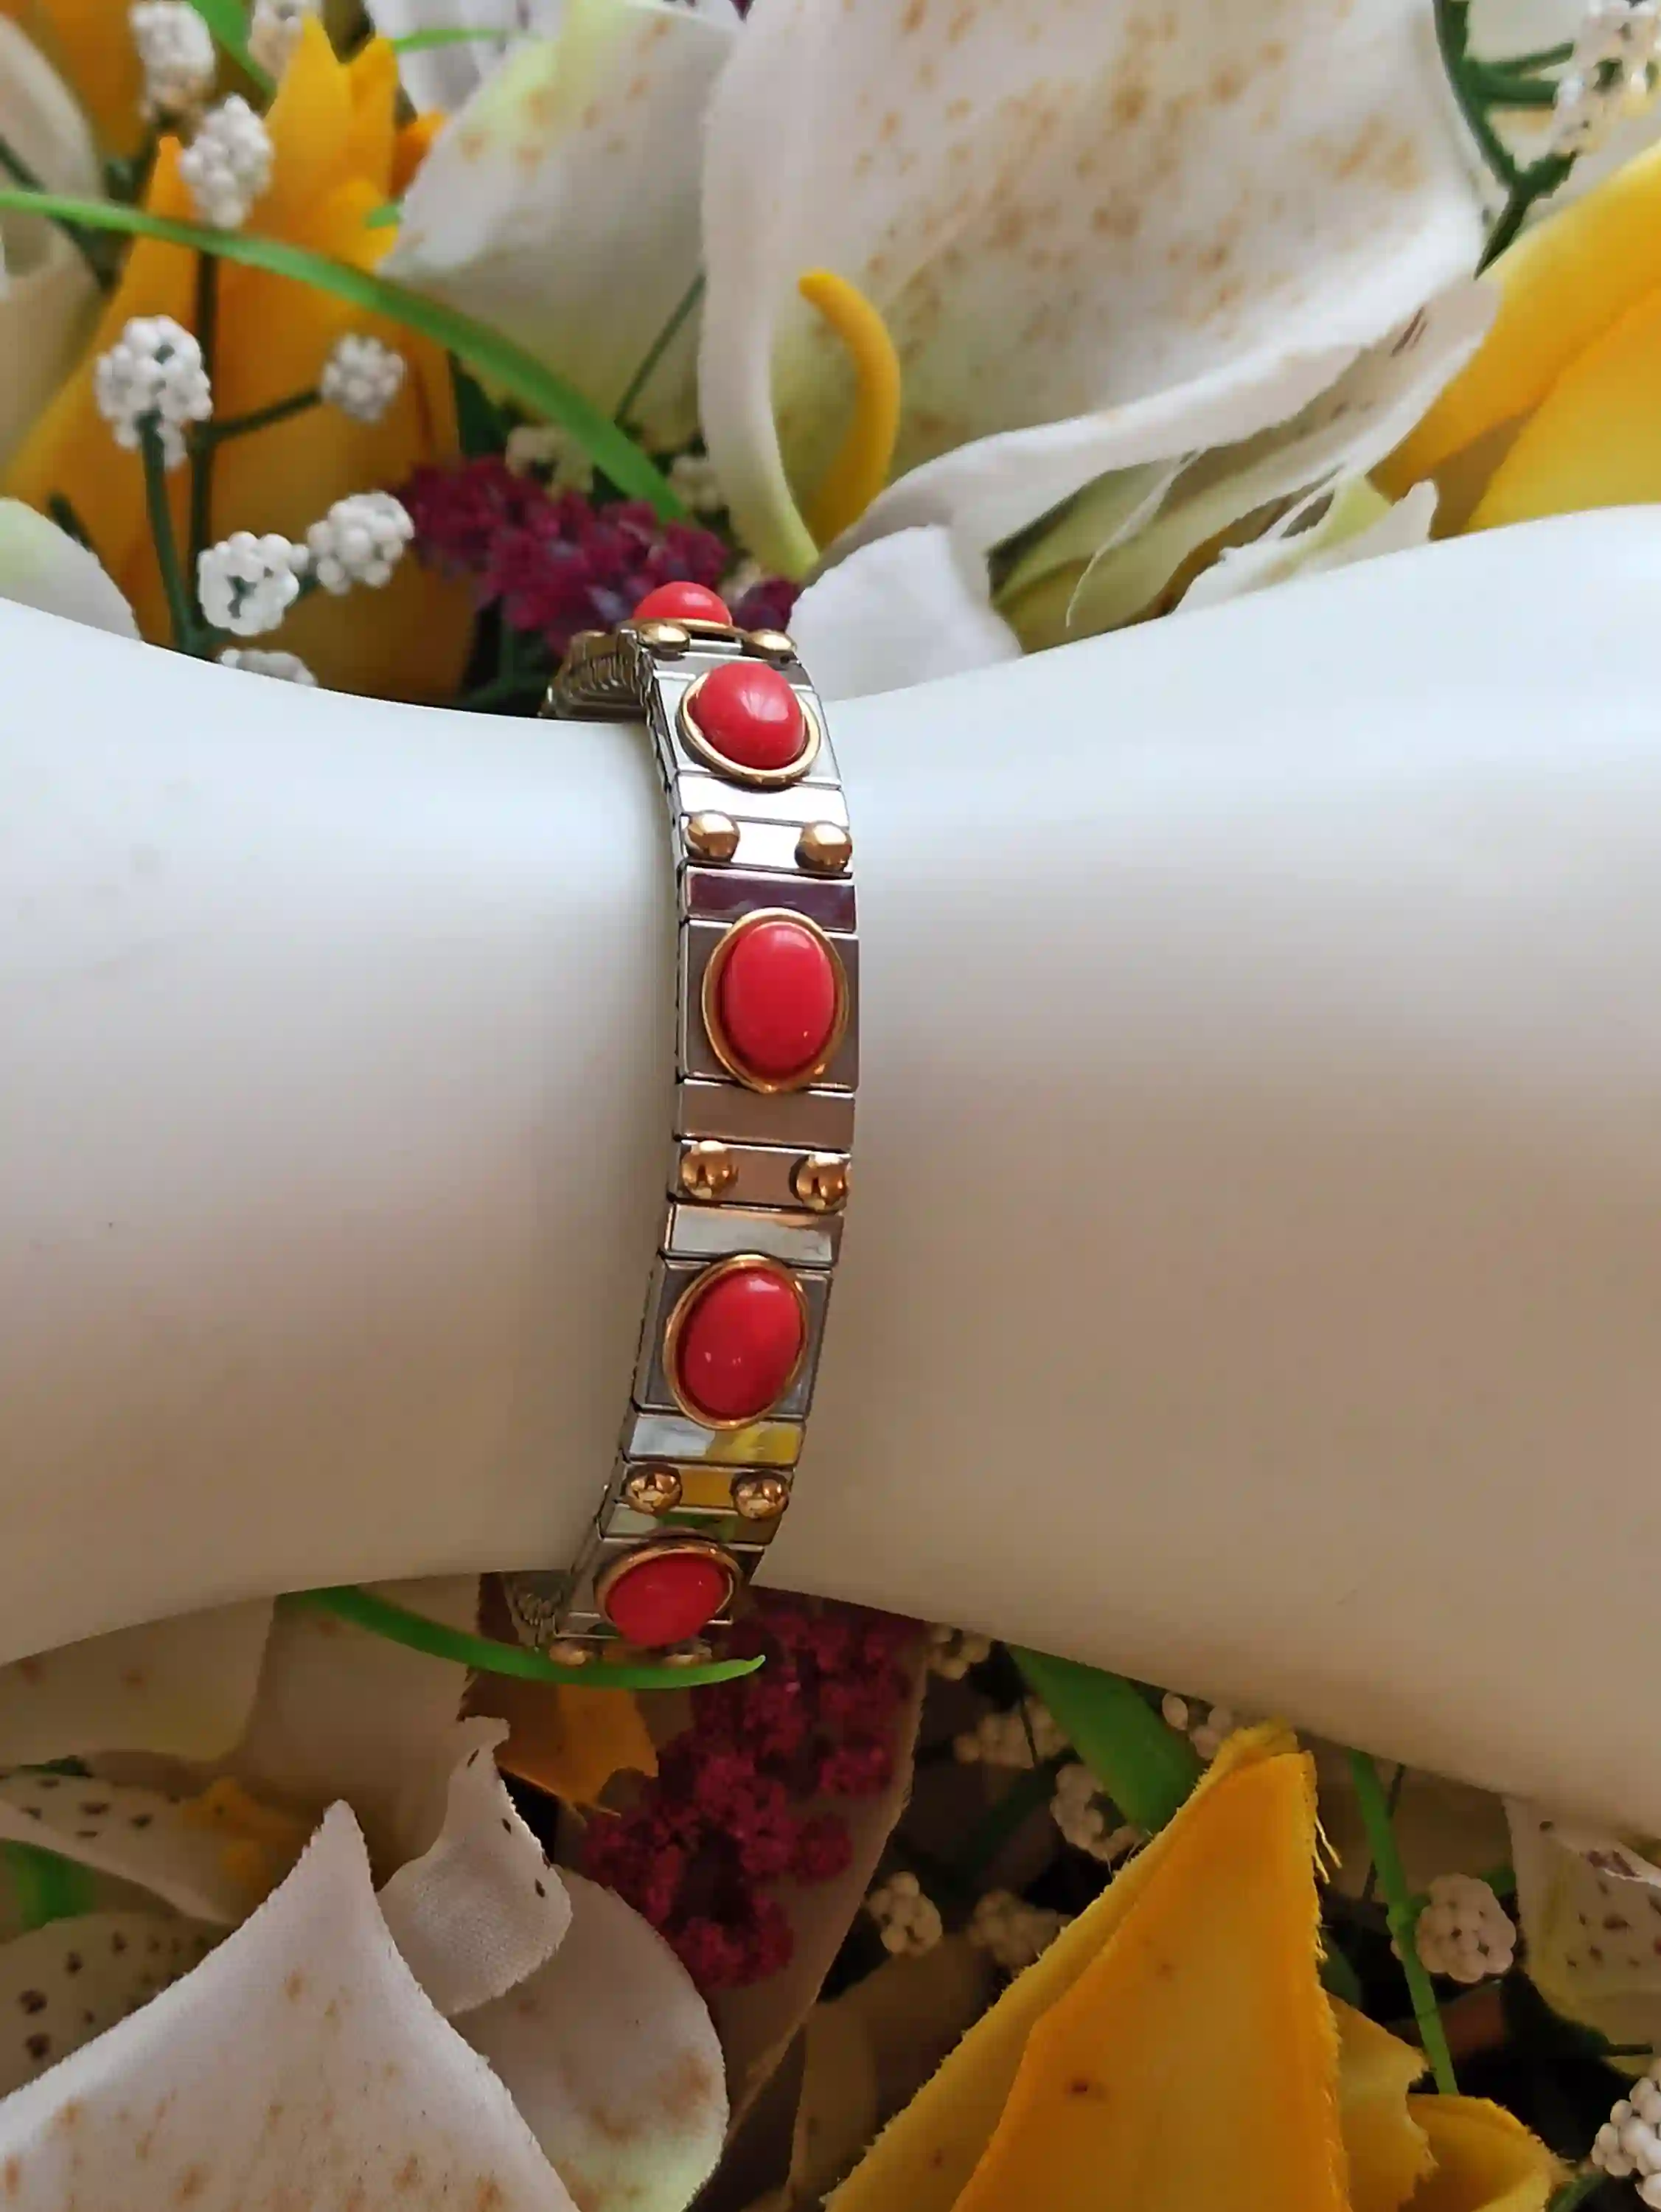 Red Coral Bangle Bracelet/Red Coral Bracelet/Summer Jewelry/Gift for Women/ Holiday Jewelry/Swarovski Red Bracelet Handmade Crystal Jewelry 